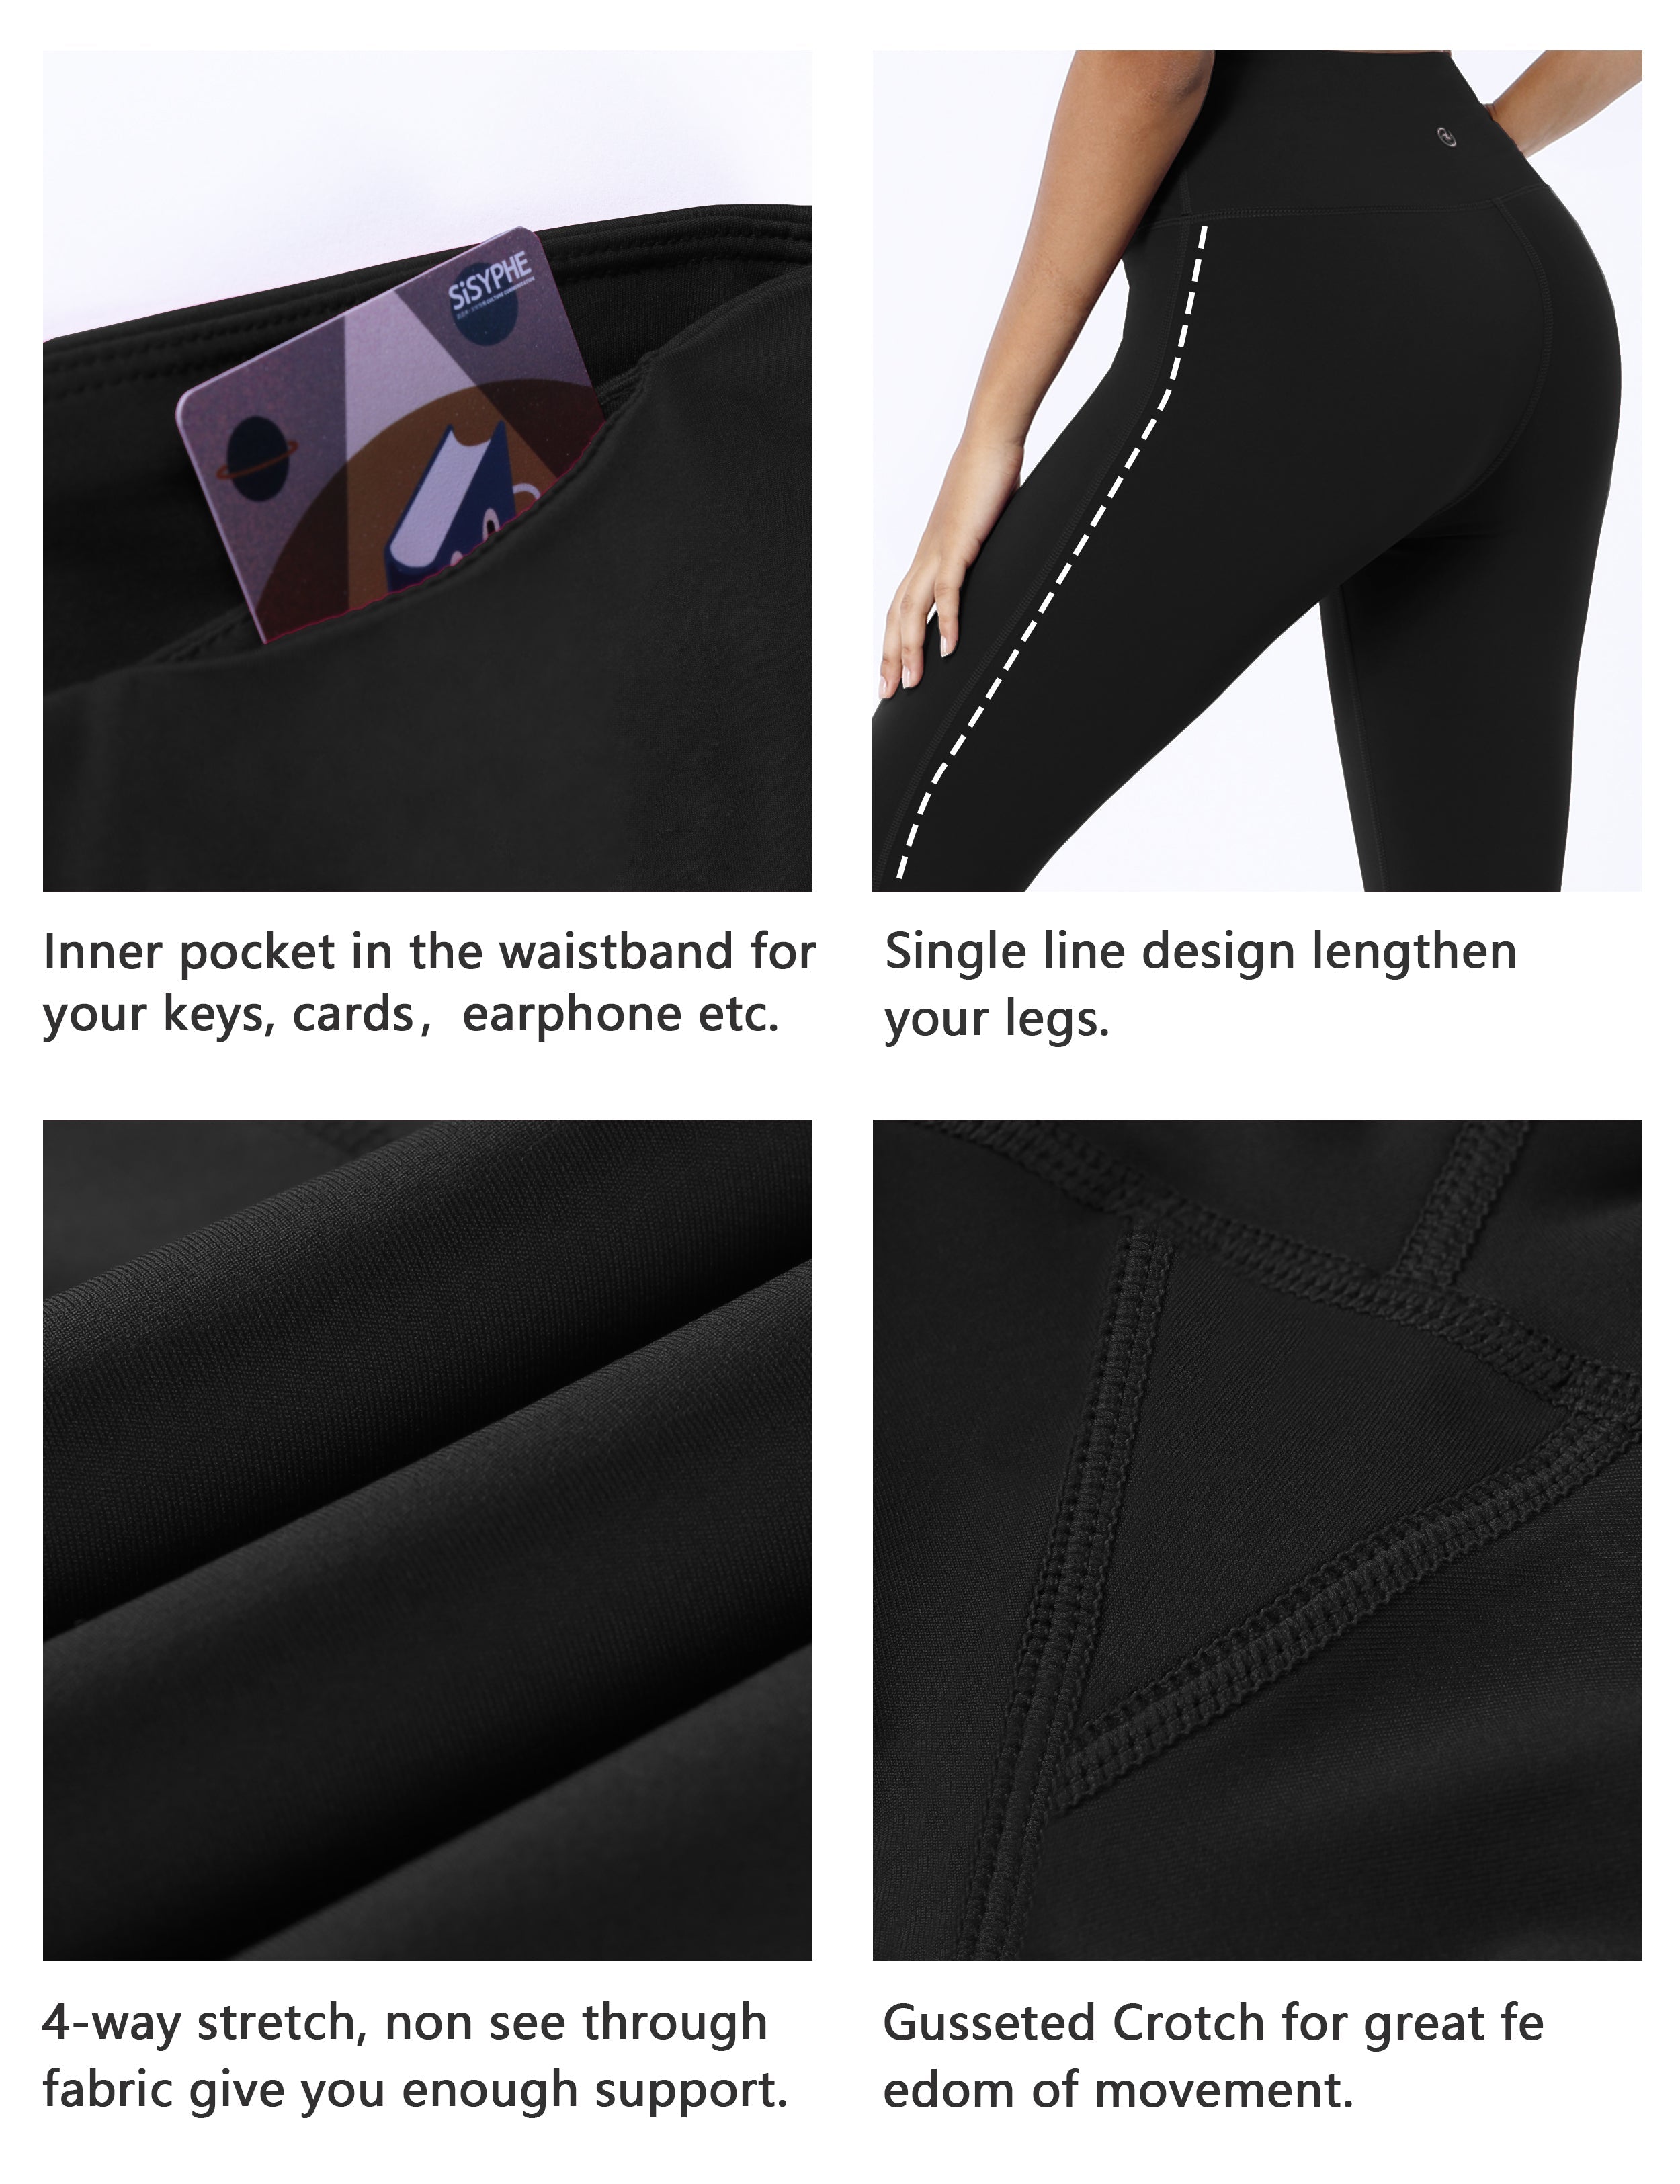 High Waist Side Line Biking Pants black Side Line is Make Your Legs Look Longer and Thinner 75%Nylon/25%Spandex Fabric doesn't attract lint easily 4-way stretch No see-through Moisture-wicking Tummy control Inner pocket Two lengths